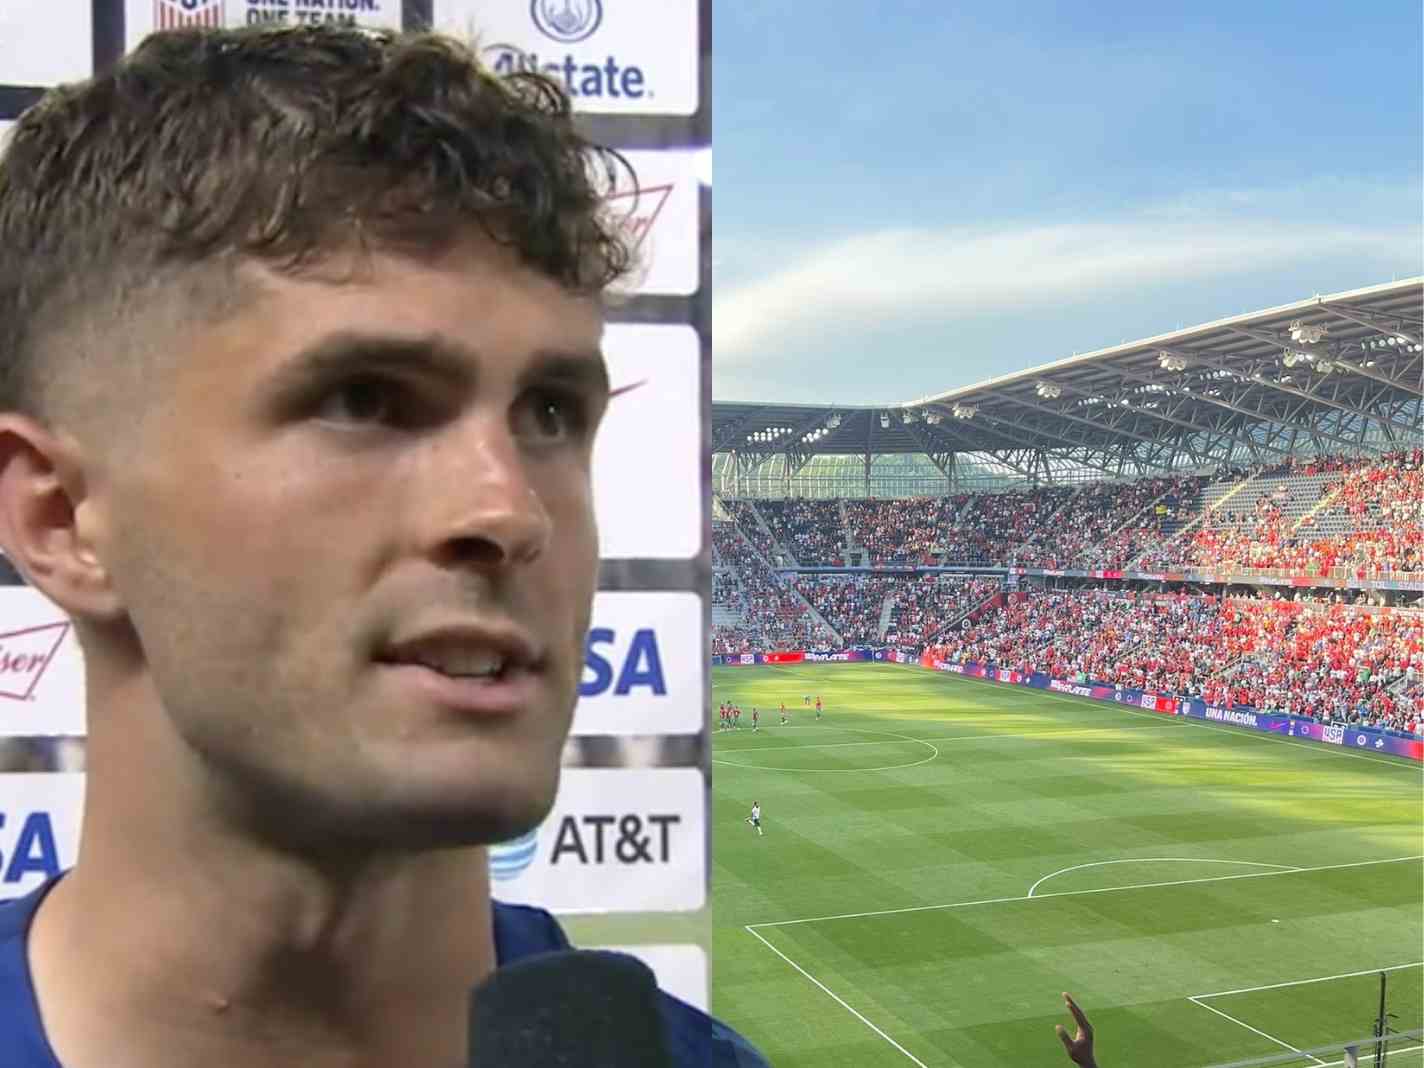 Christian Pulisic blamed USMNT fans for low turnout at the TQL Stadium